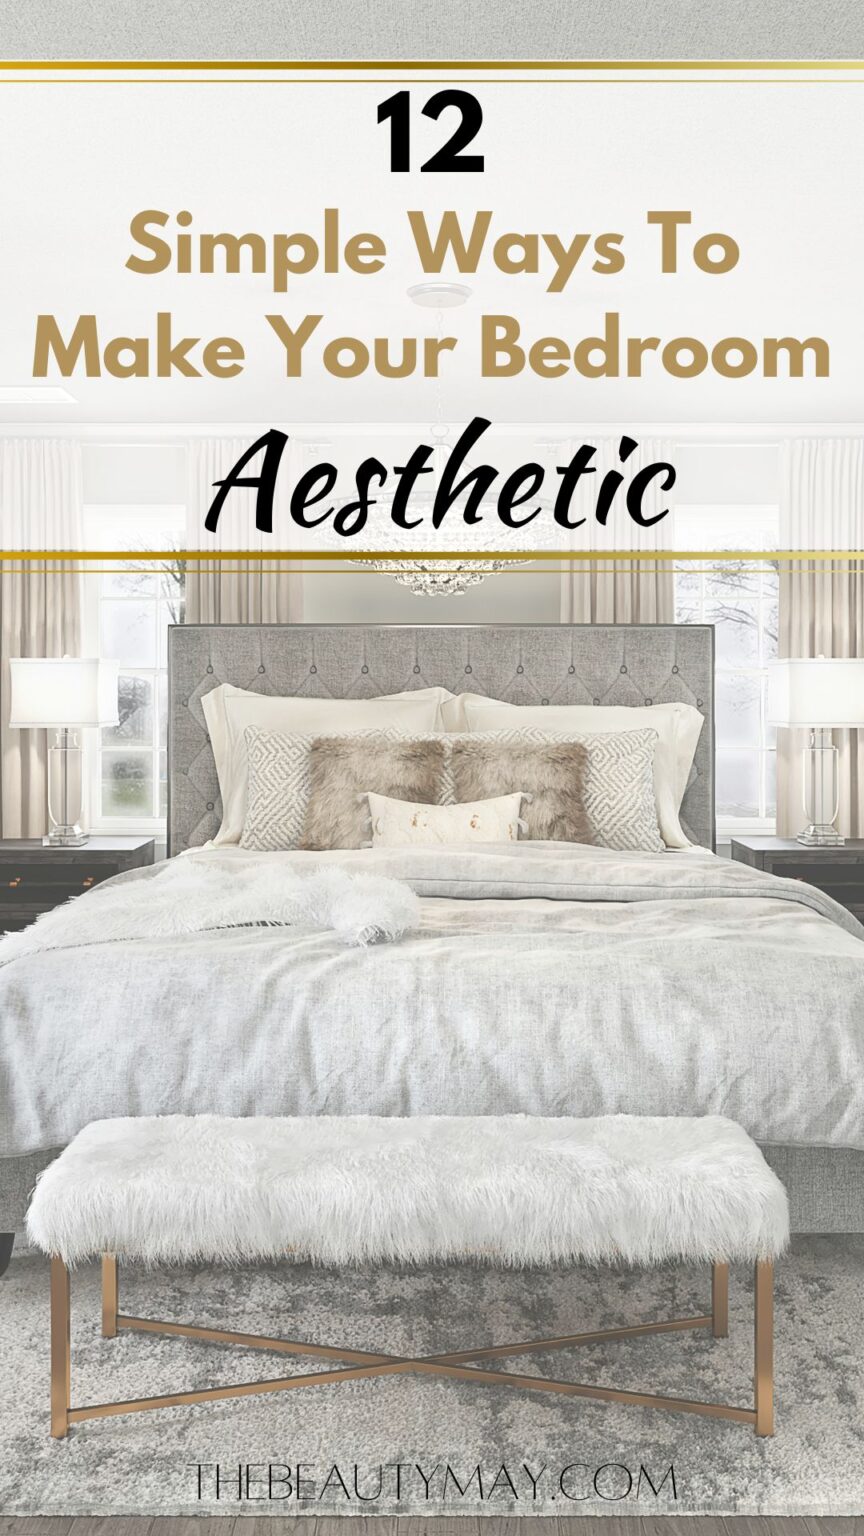 12 Ways to Make Your Bedroom Aesthetic and Cozy - The Beauty May